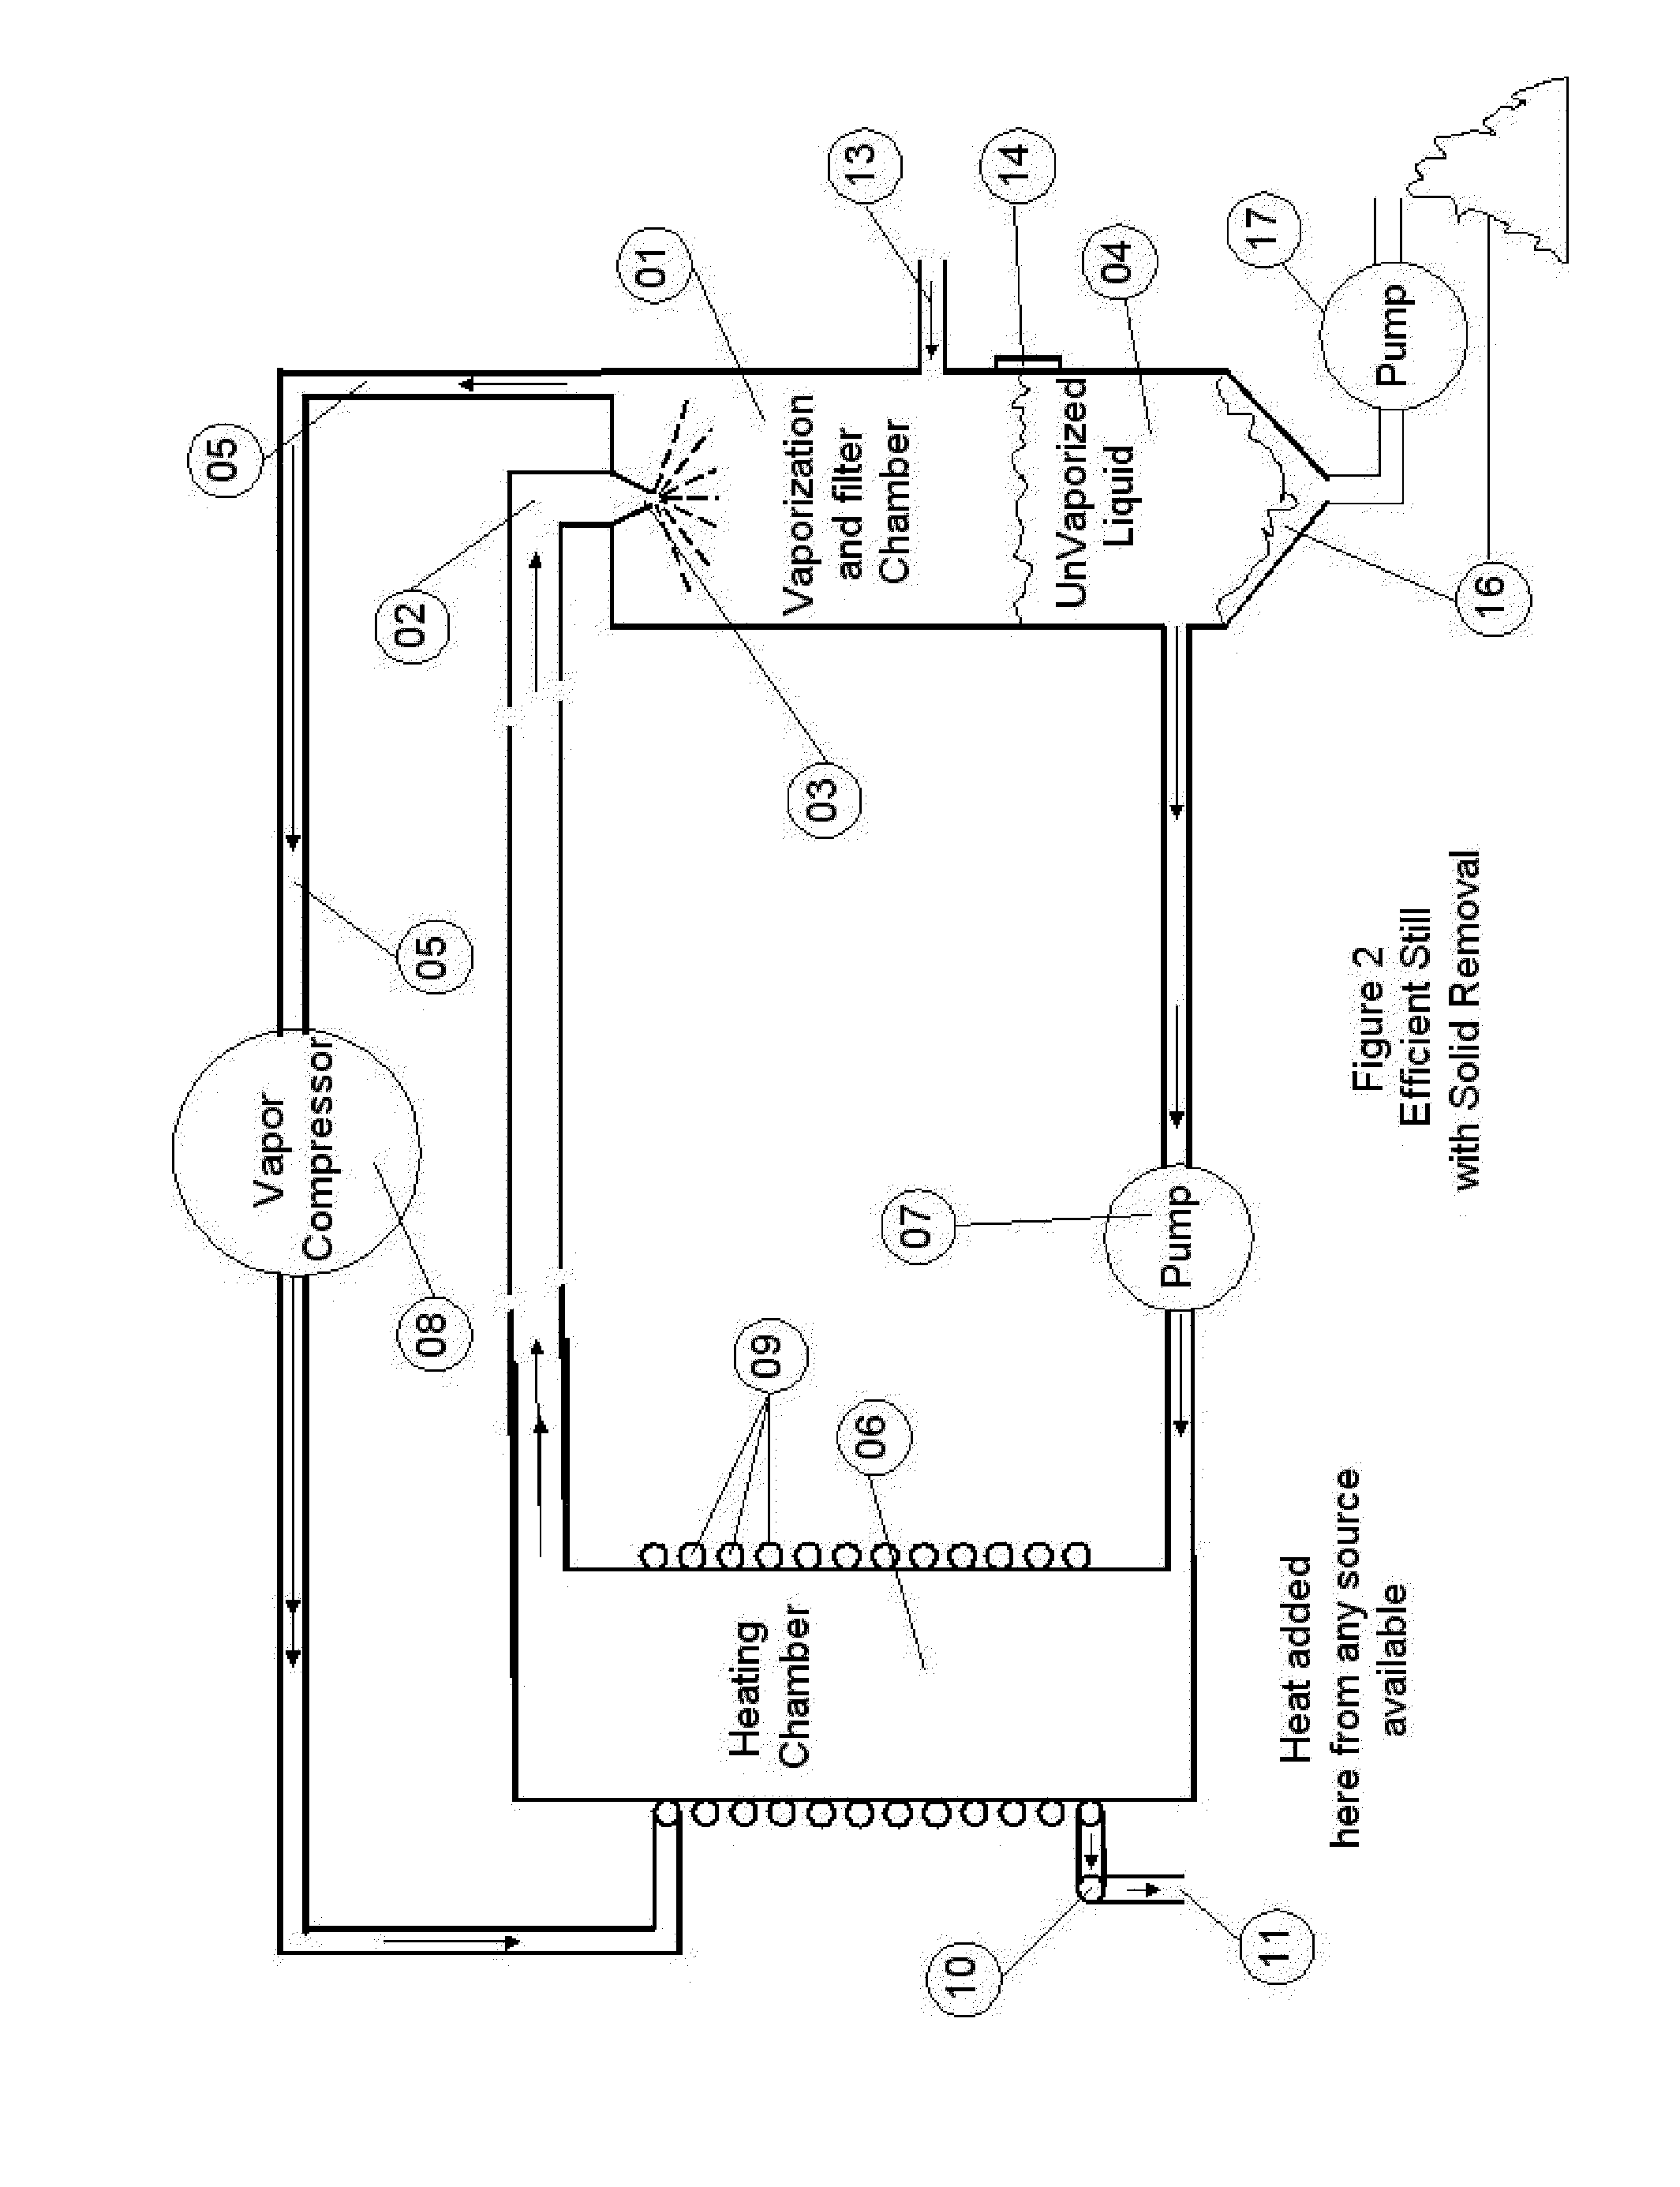 Method and apparatus for effluent free sea water desalination